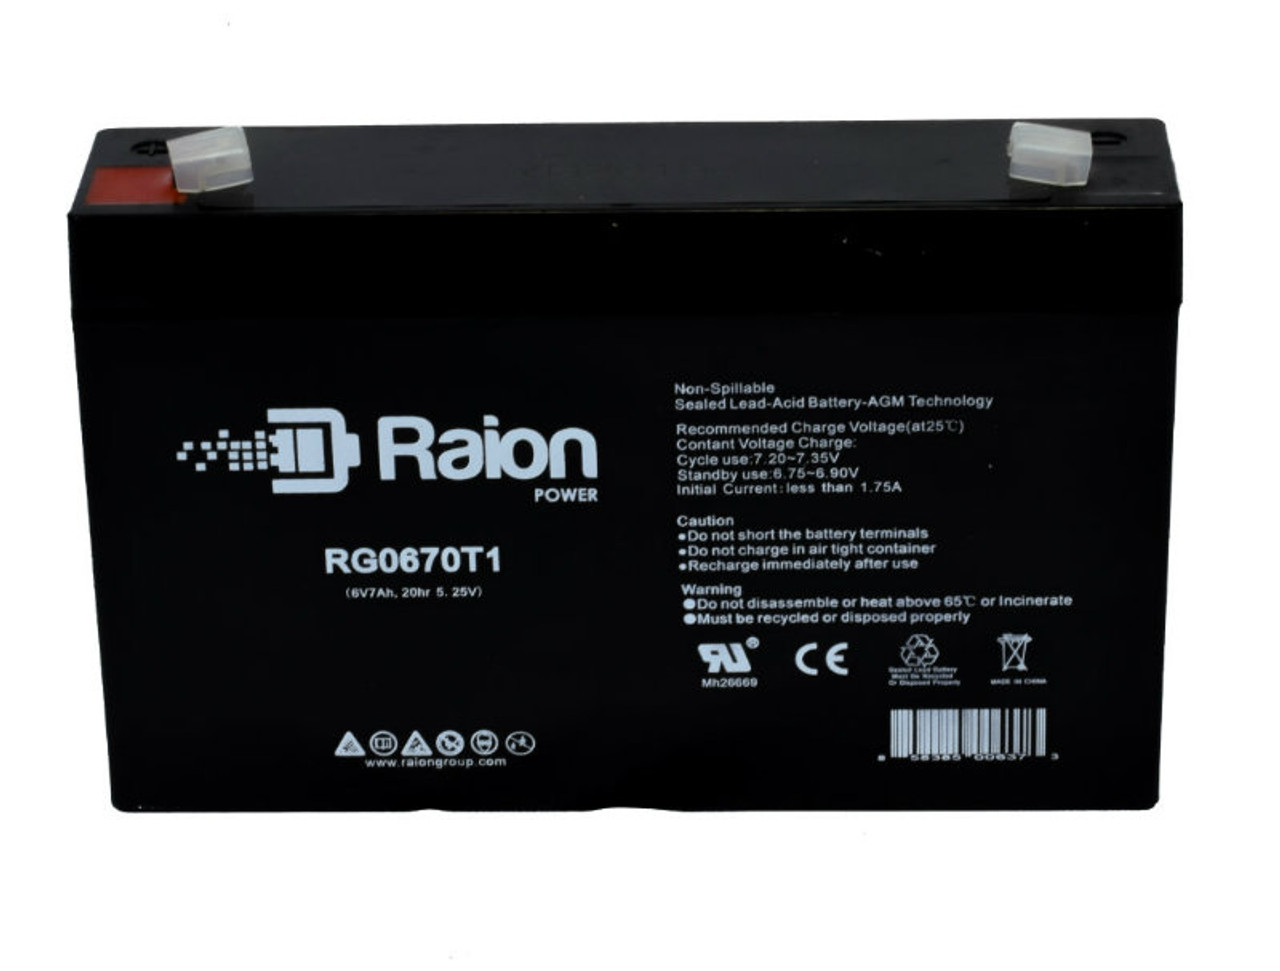 Raion Power RG0670T1 Replacement Battery Cartridge for Fisher-Price Power Wheels FXM32 Jeep Wrangler Rubicon